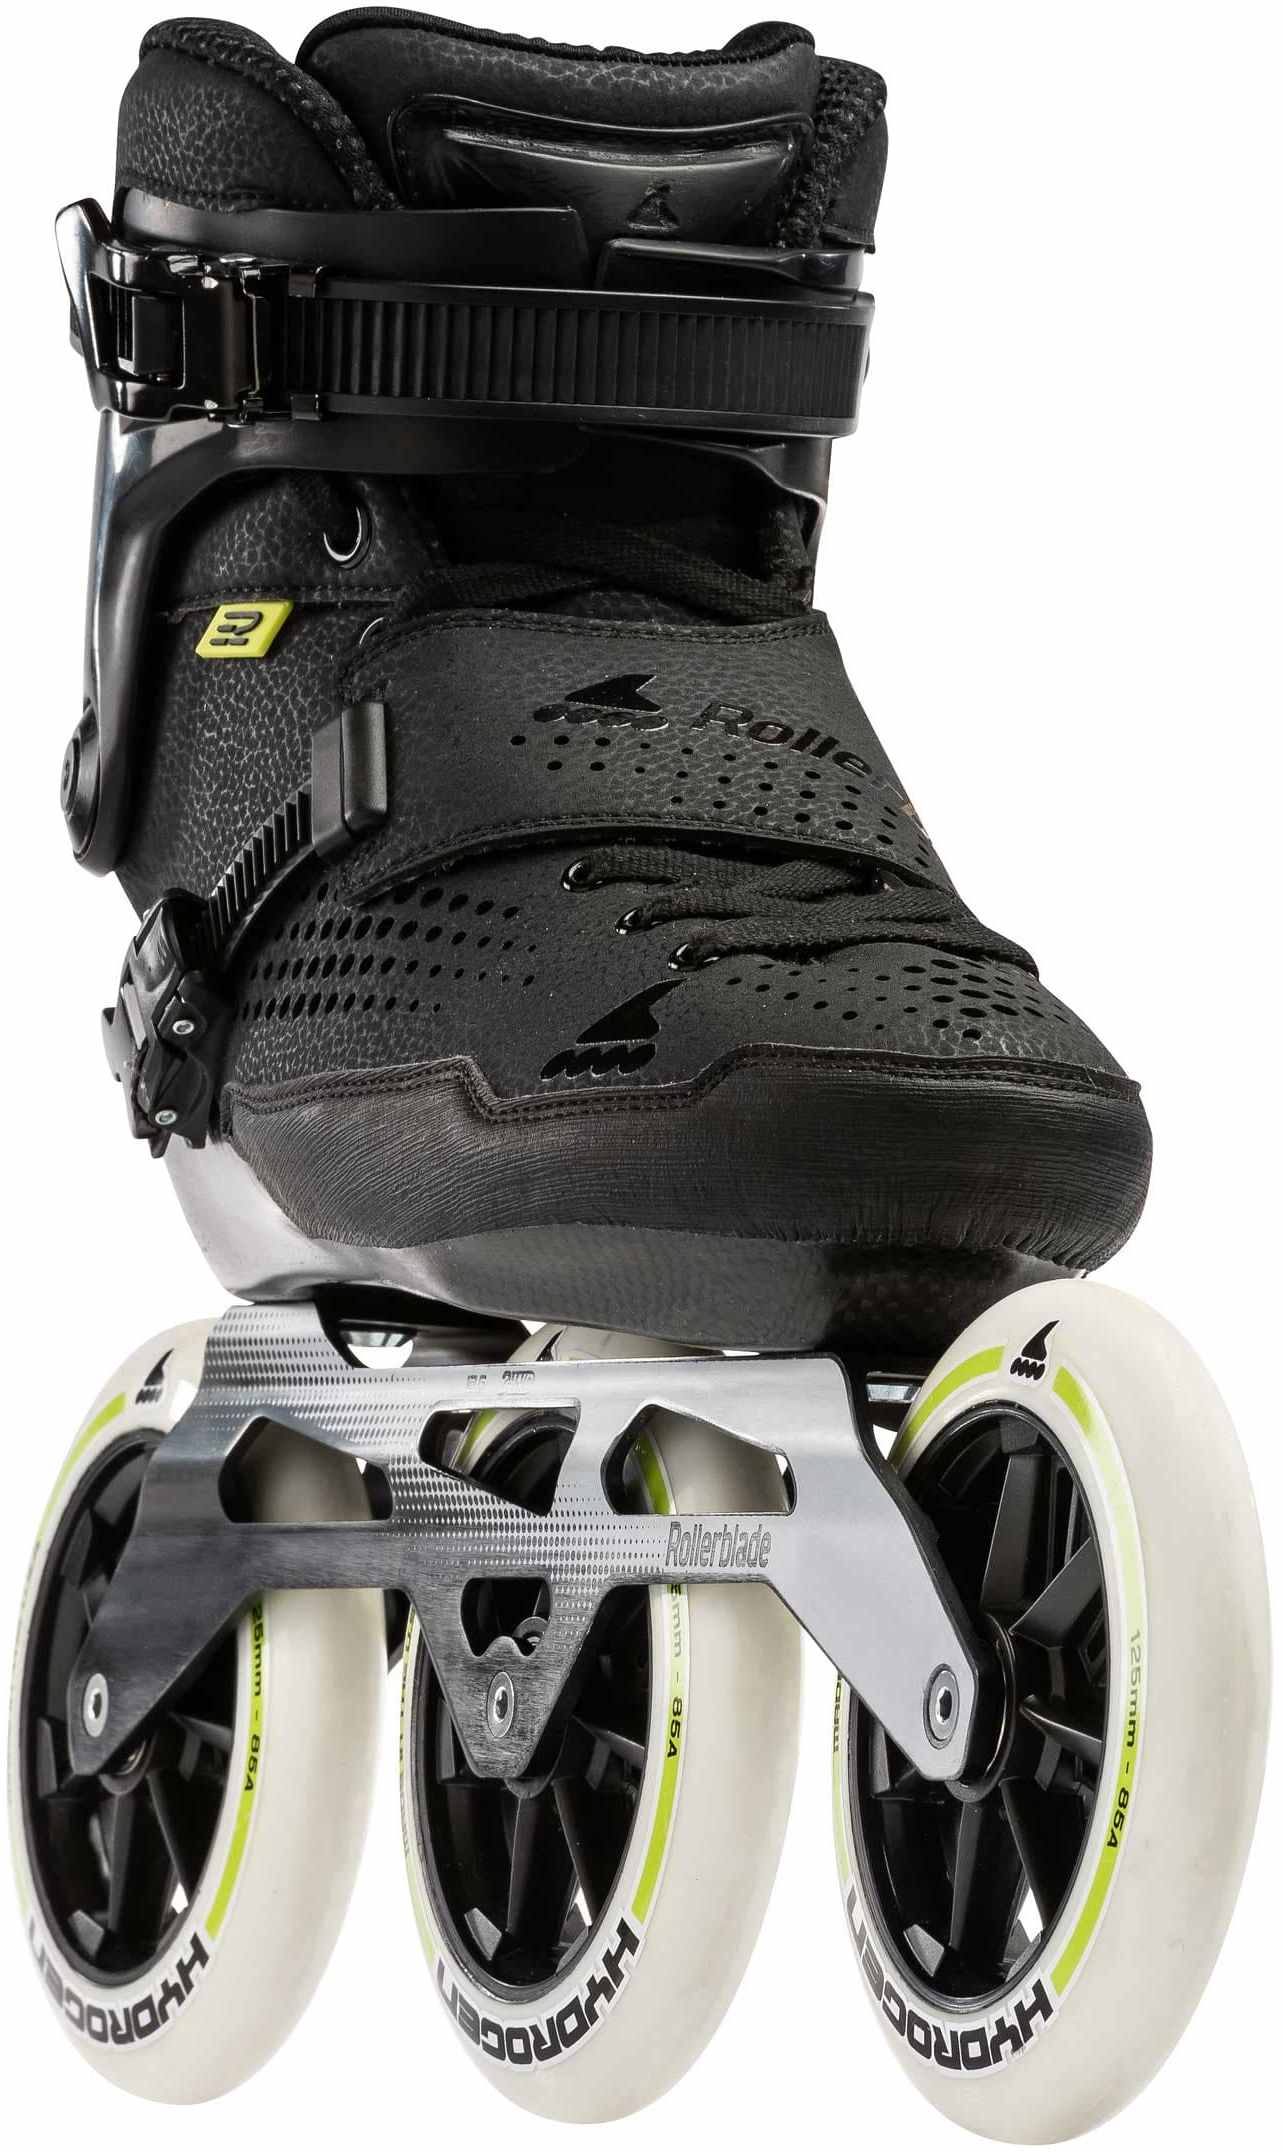 Rollerblade E2 Pro with 125 mm Hydrogen wheels front view